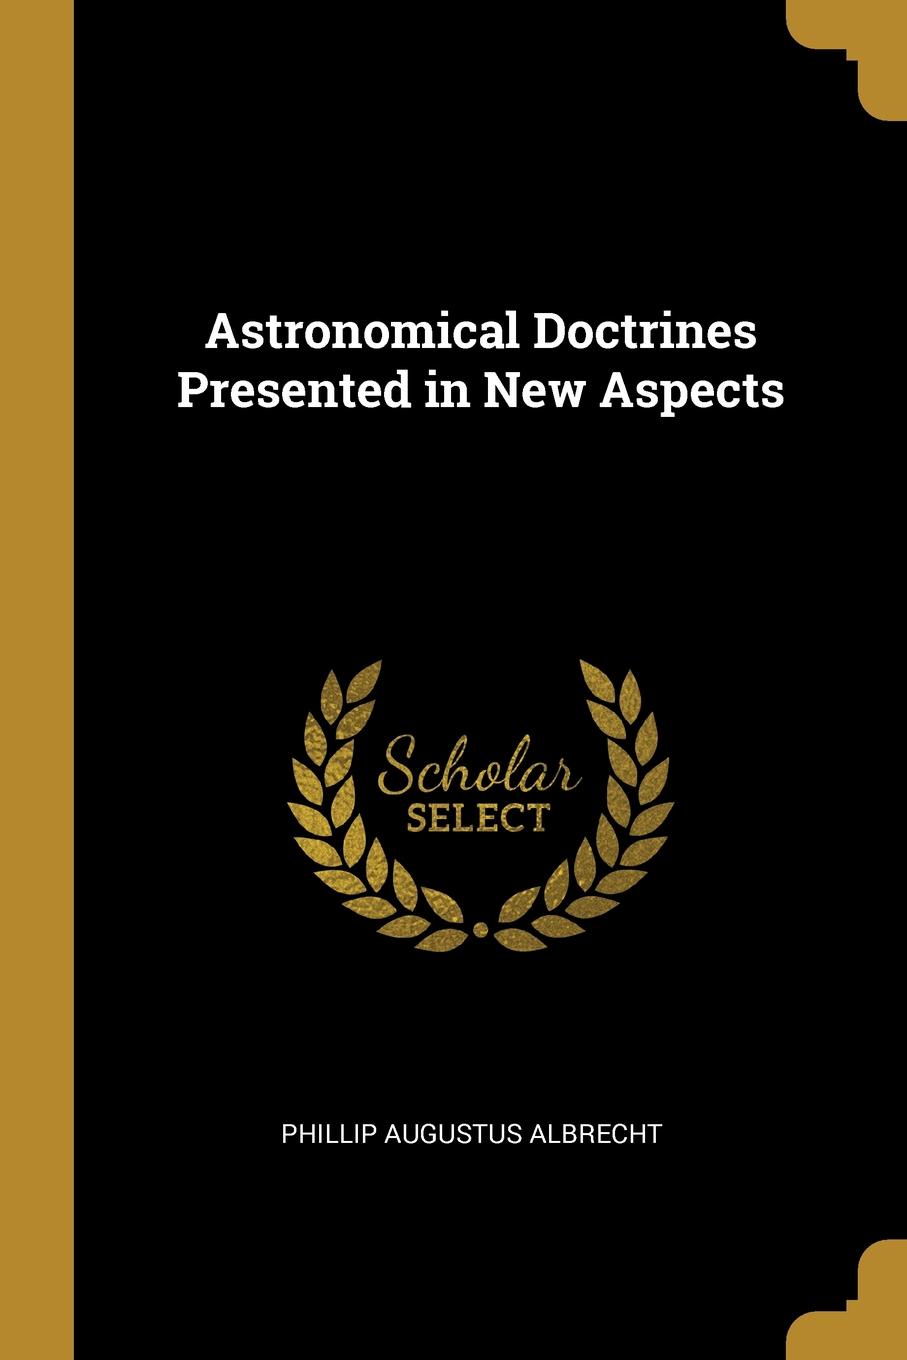 Astronomical Doctrines Presented in New Aspects